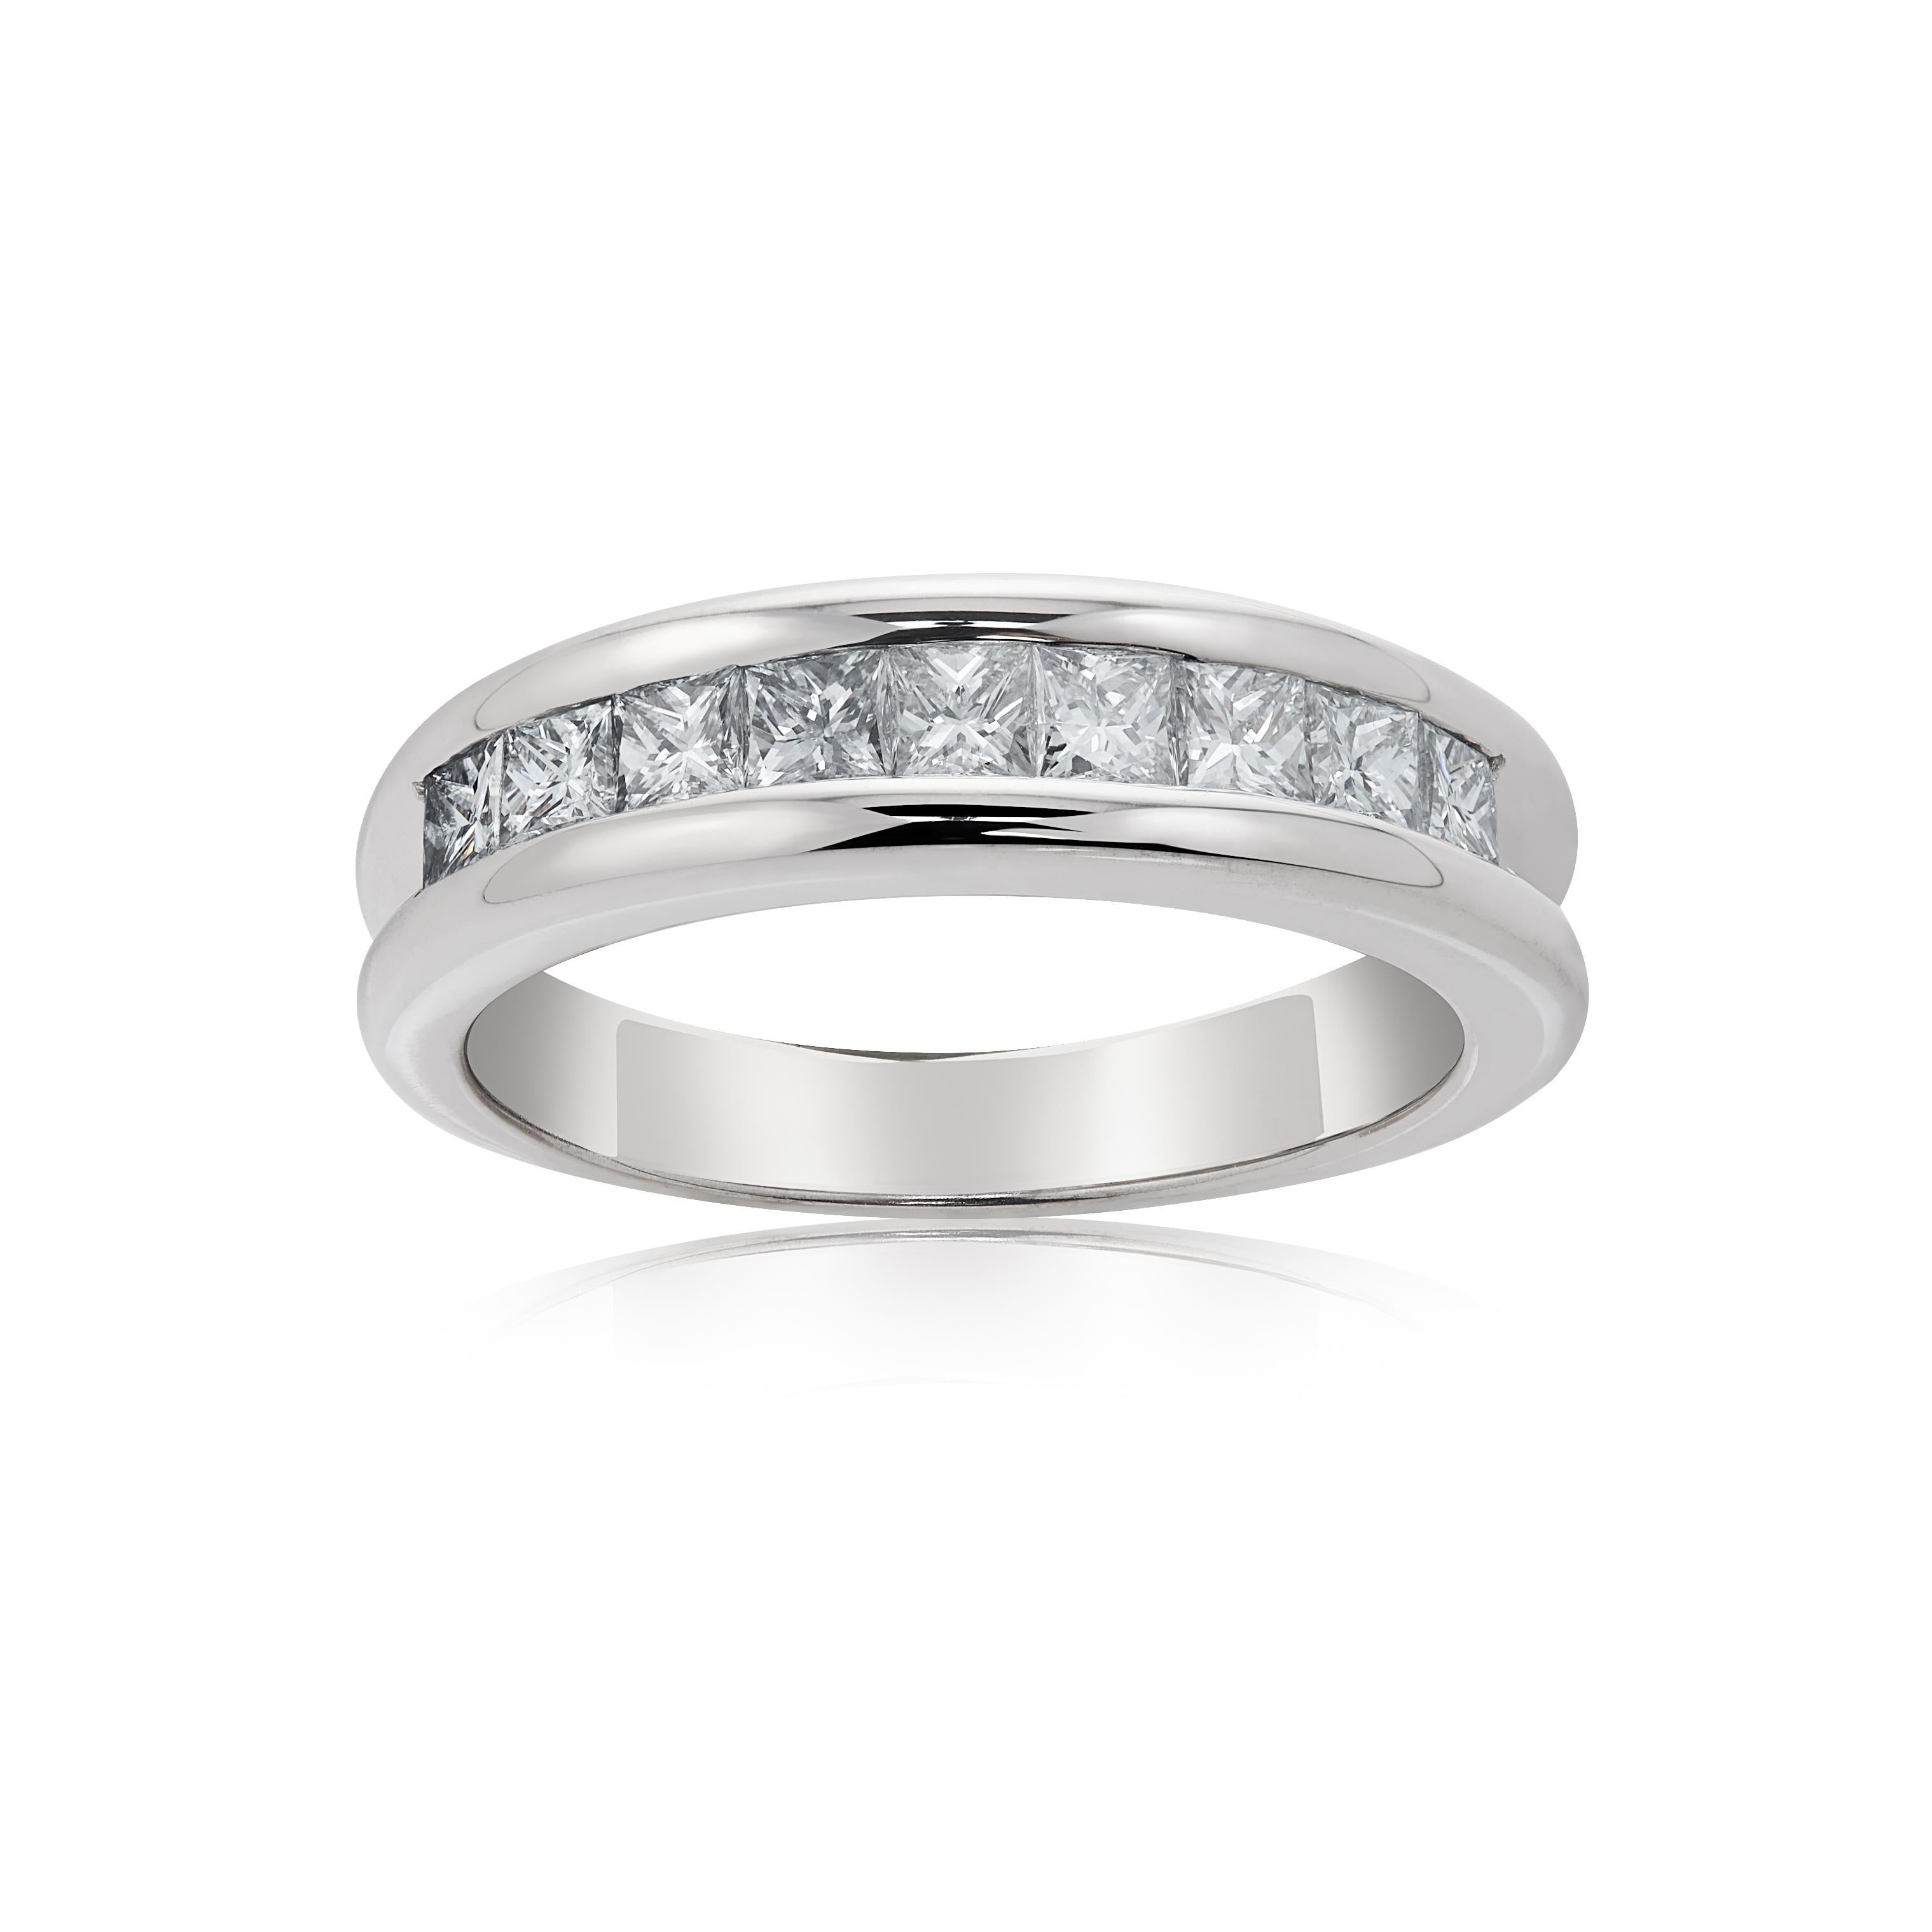 E Wolfe and Company handmade channel-set diamond ring made in 18ct white gold. The ring contains 9 princess-cut diamonds of G colour and VS clarity and weighing a total of .84 carats. It was handmade at our London Workshop during 2021 and weighs